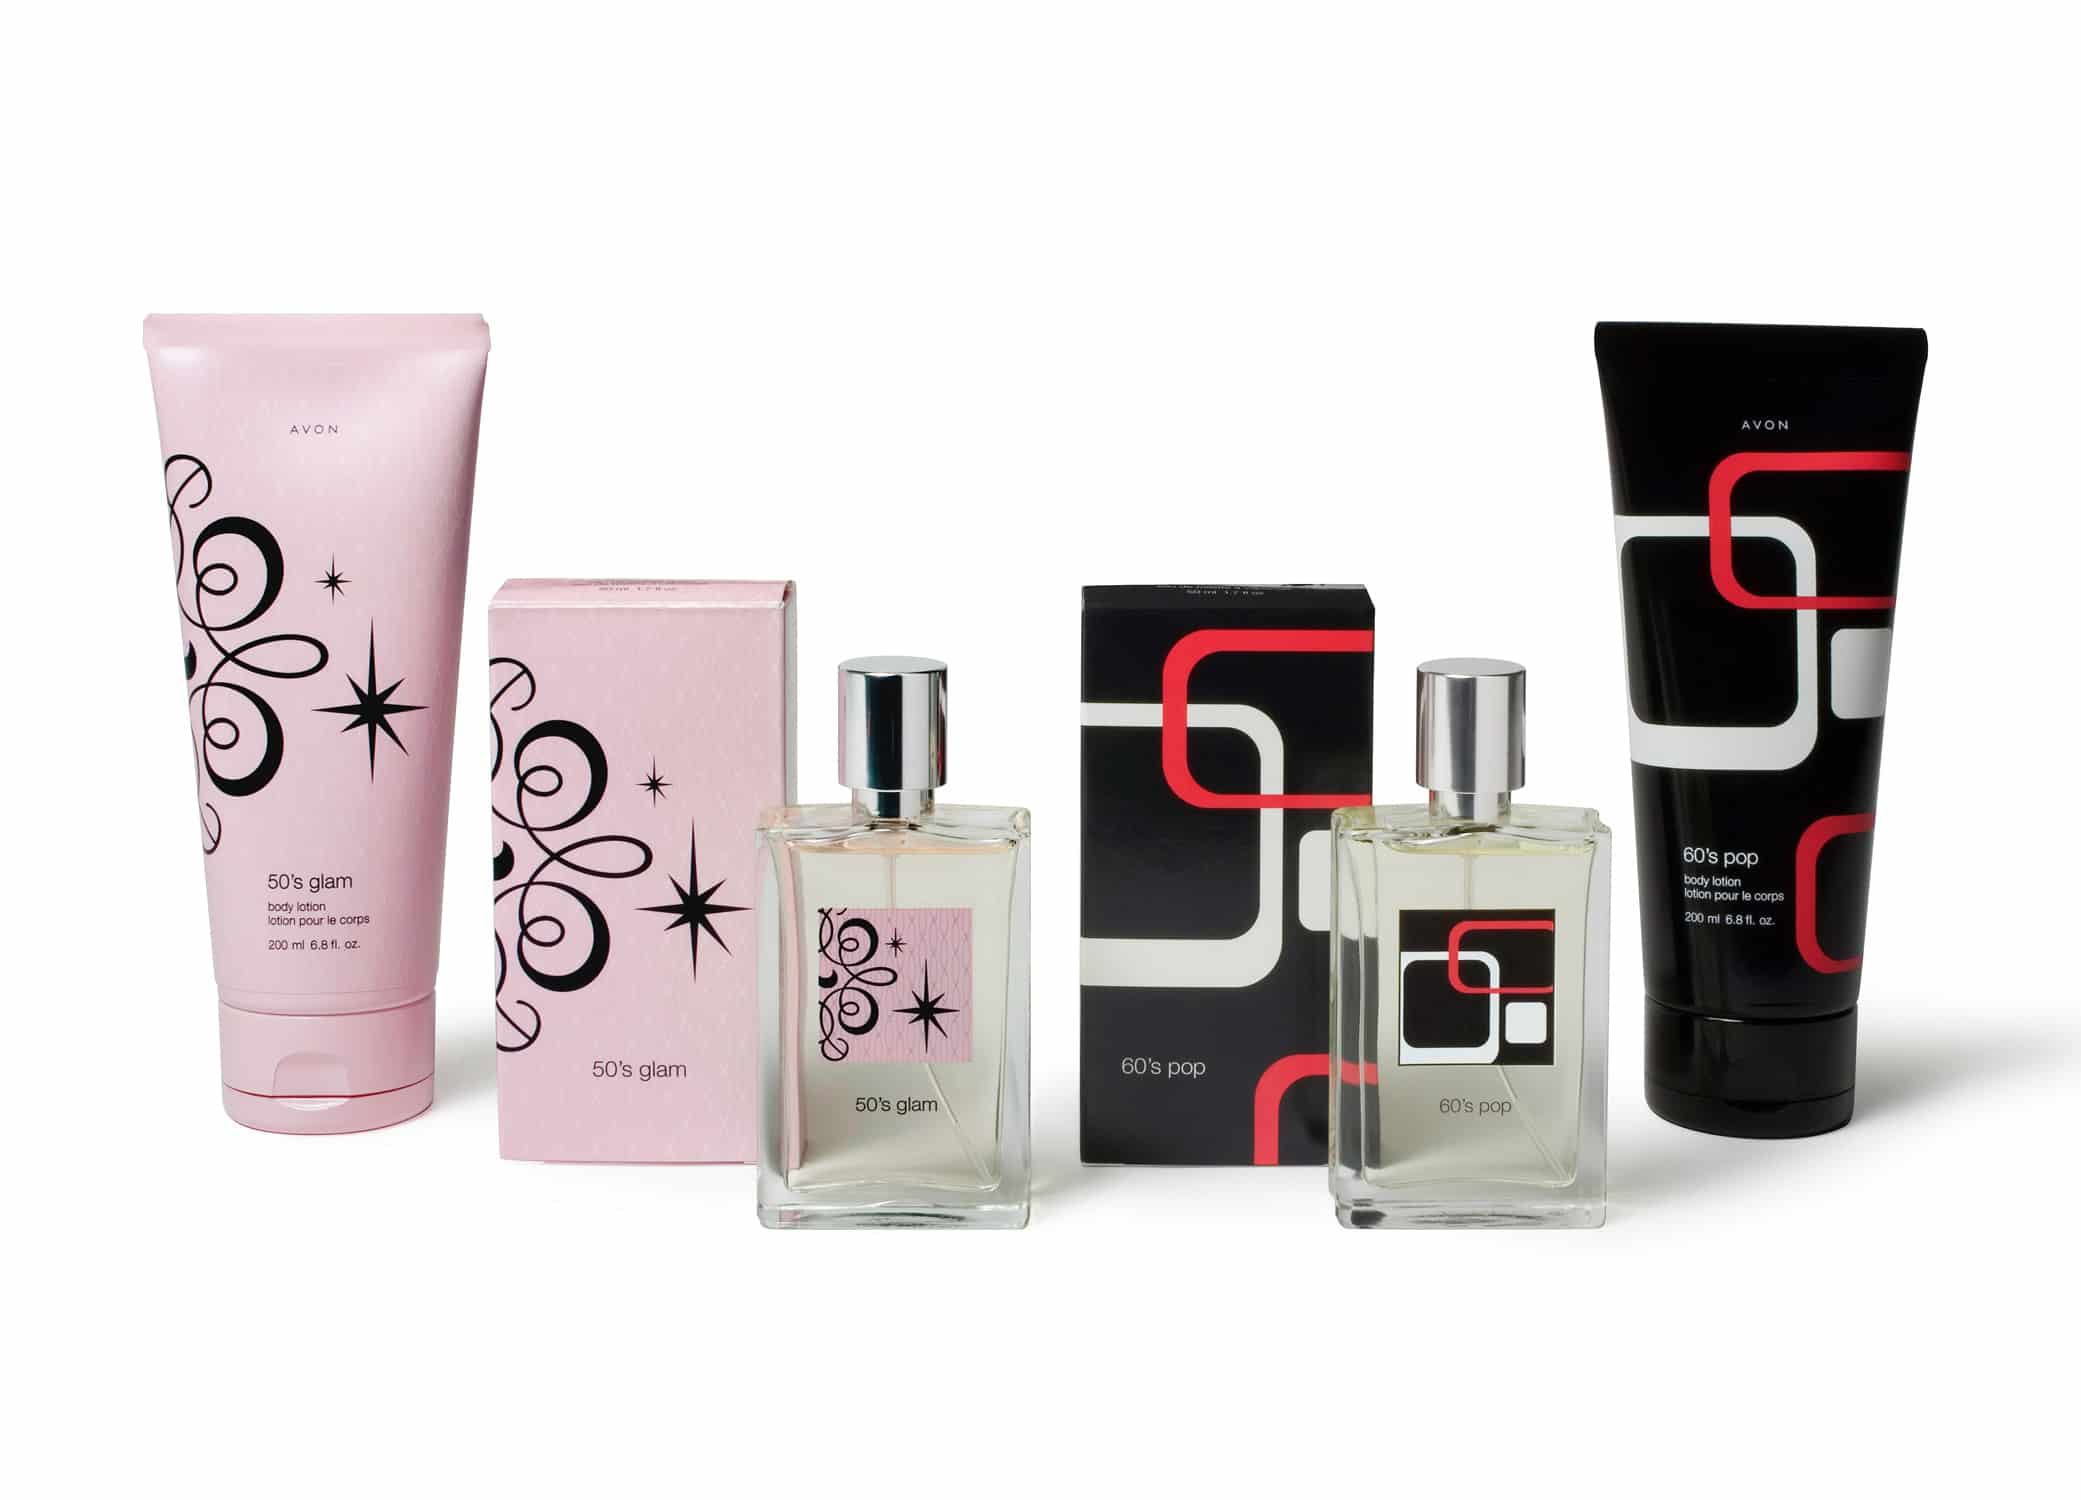 Avon Retro fragrance bottle designs, one 50s-inspired in light pink and black packaging, and one 60s-inspired in black and red.